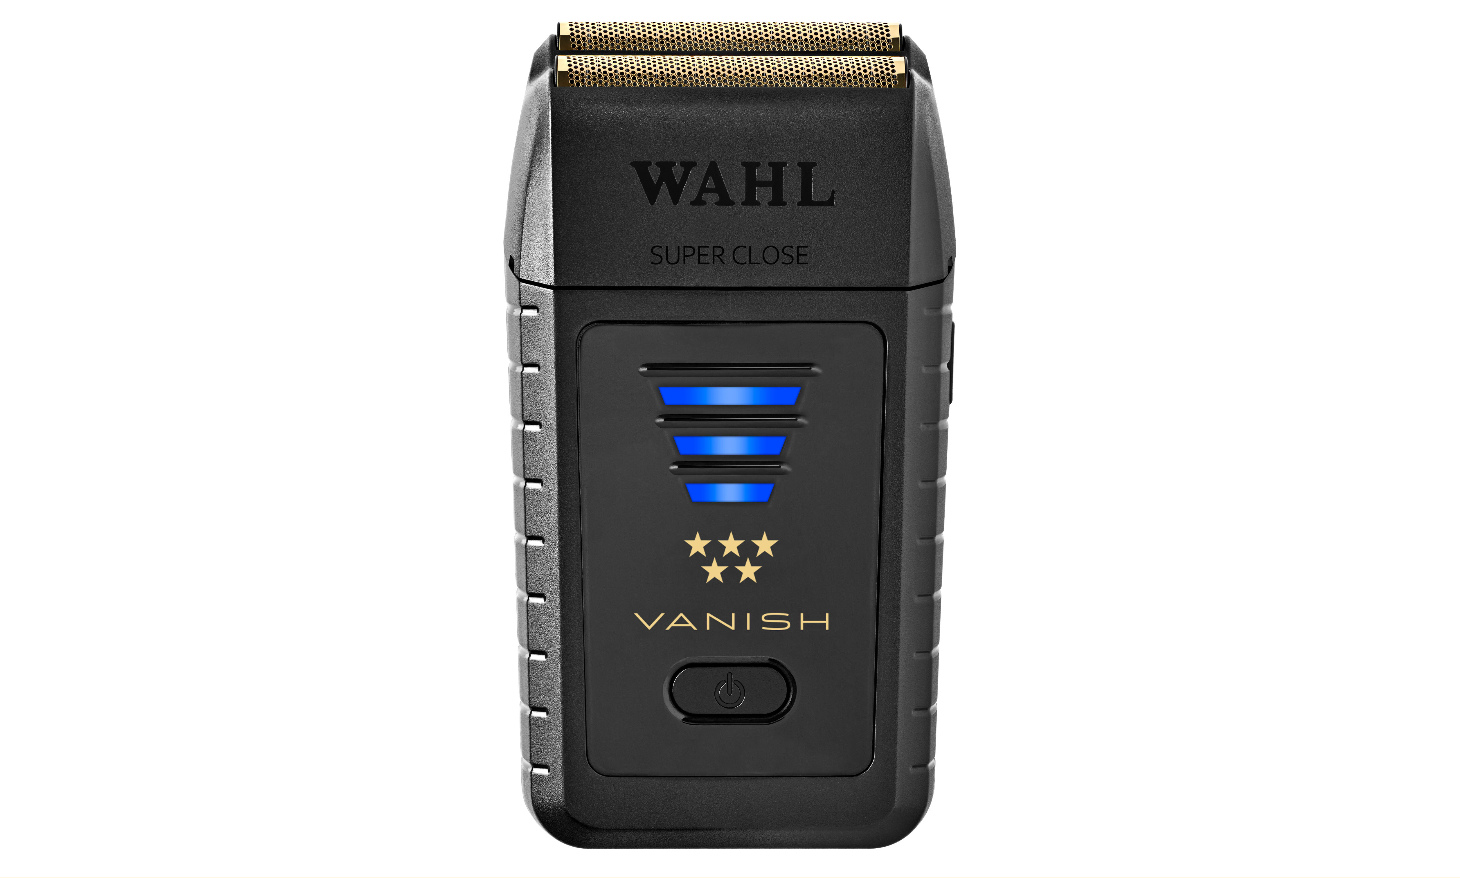 Wahl Professional® Releases 5 Star Vanish® Shaver for Flawless